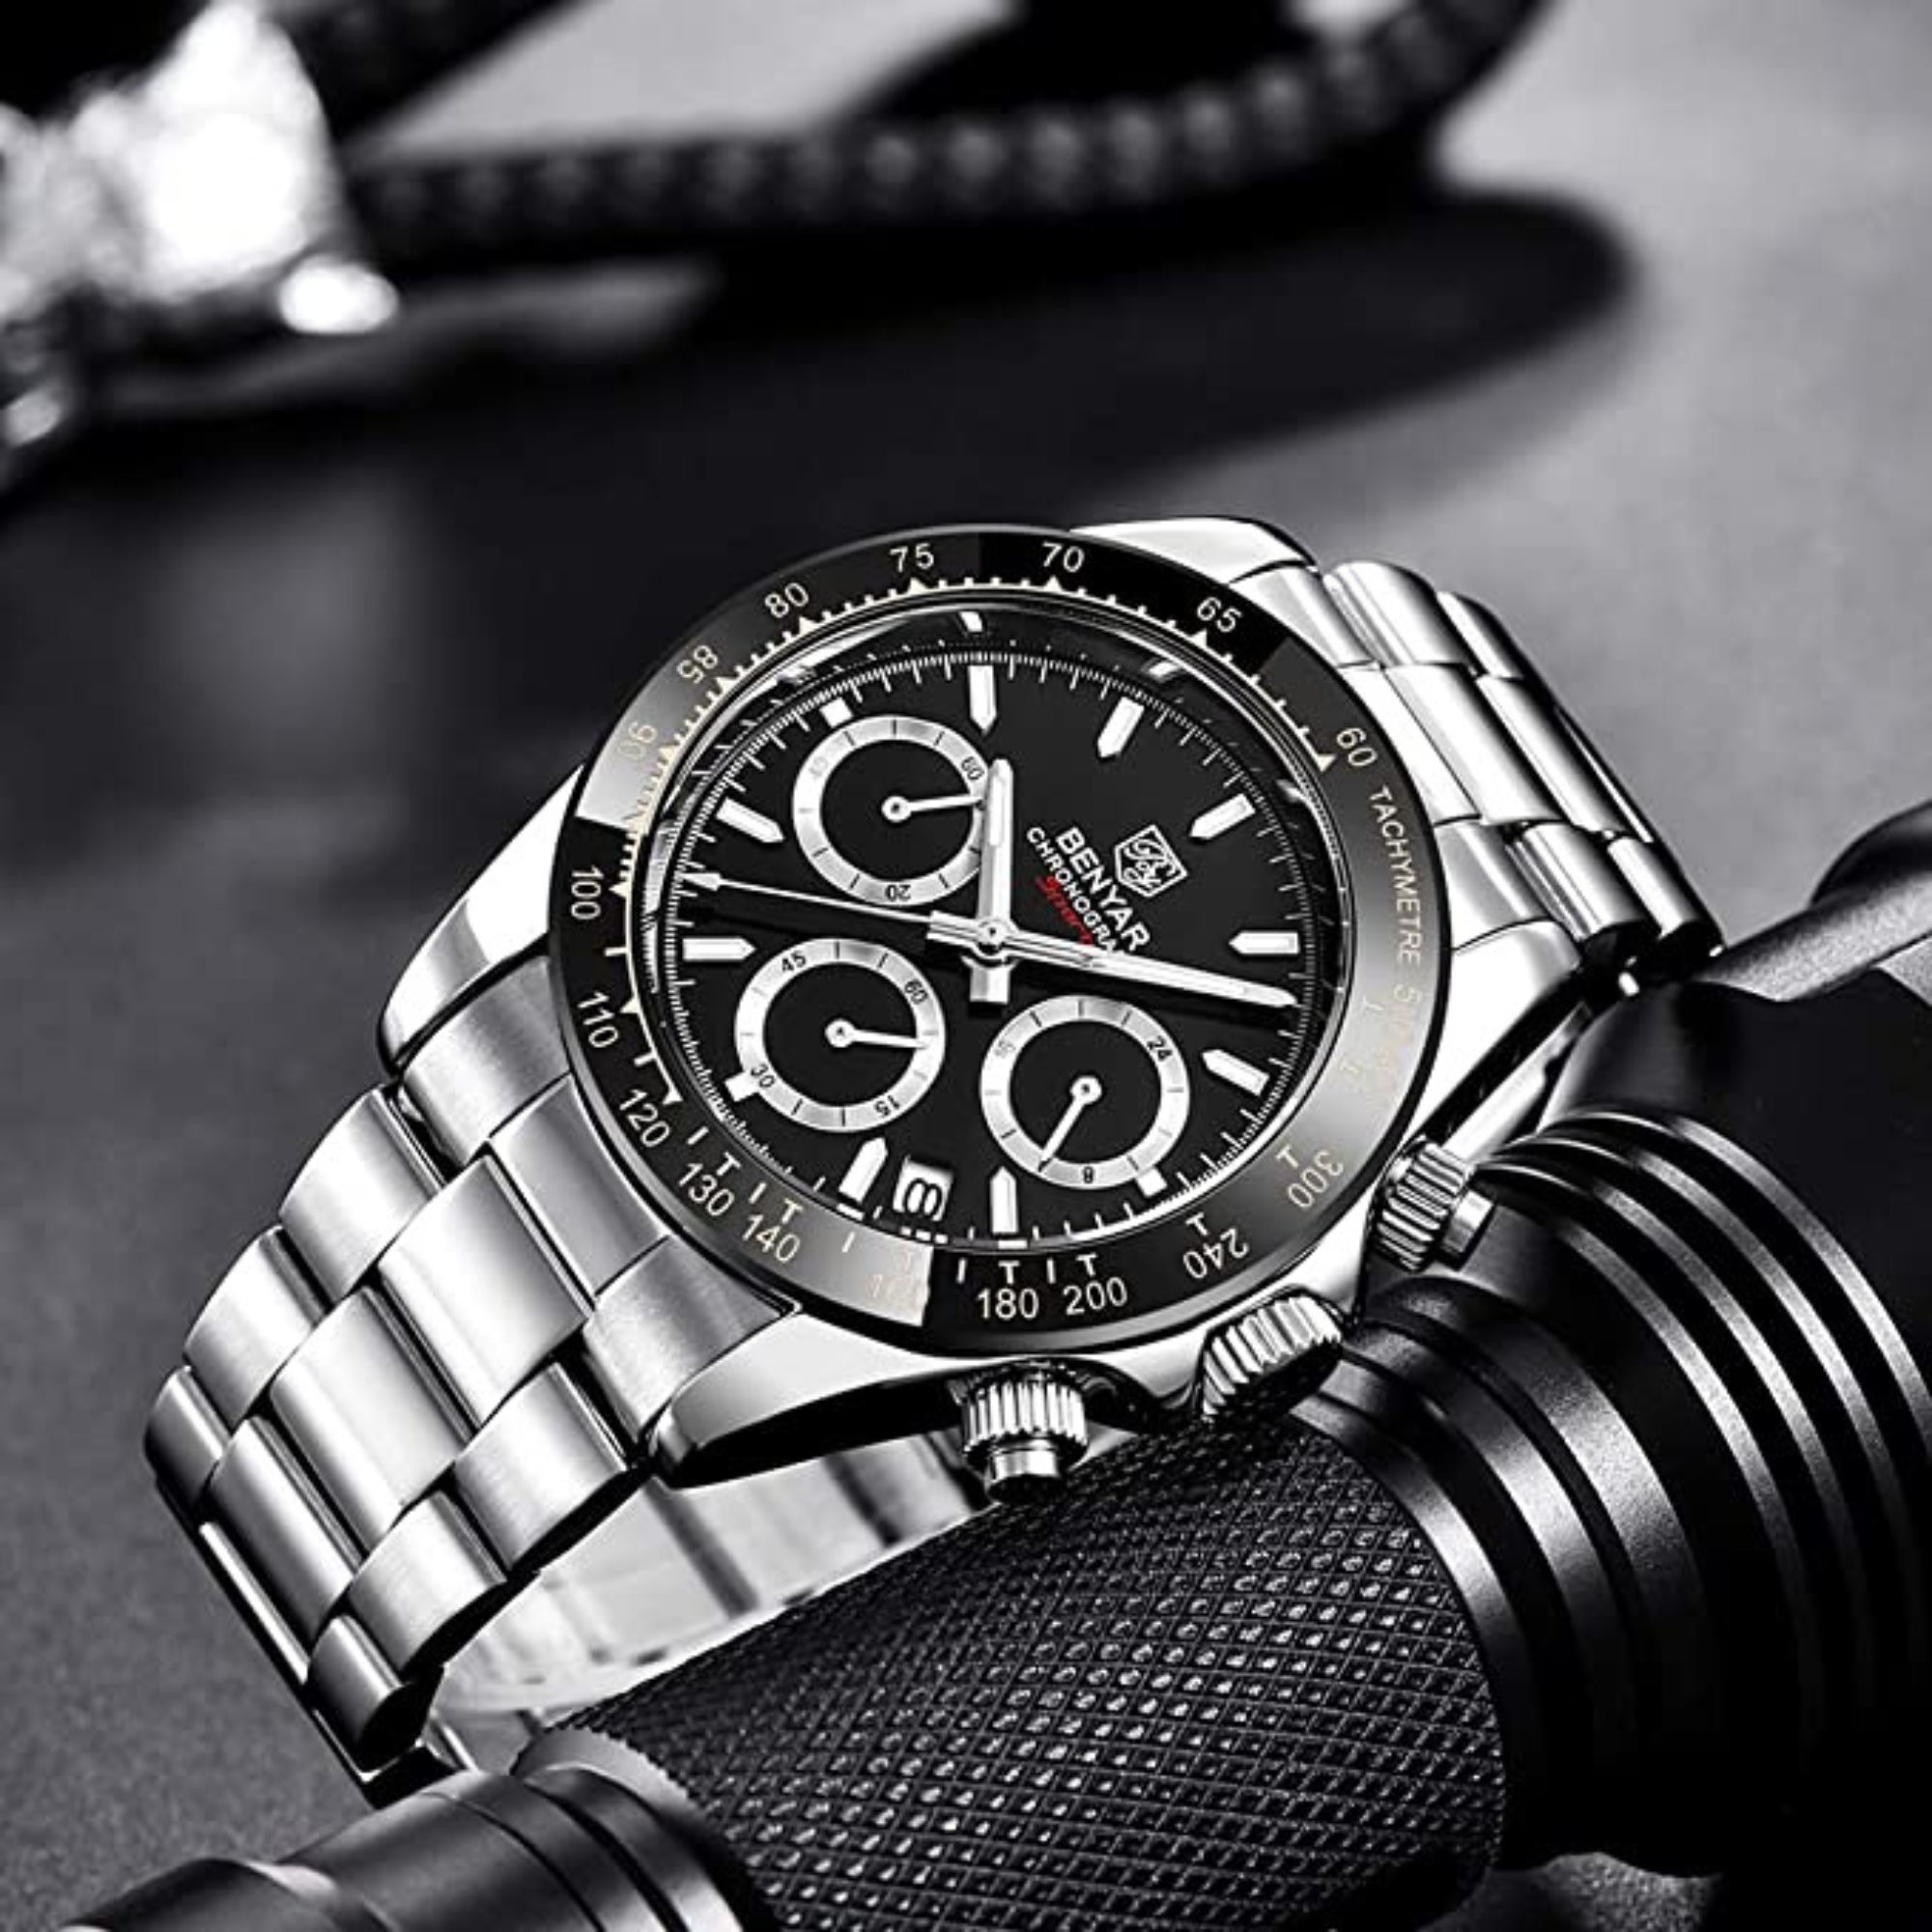 Benyar - BY-5169 Silver Black Classic Men's Watch with Chronograph and Stainless Steel Strap benyar watches online india dream watches